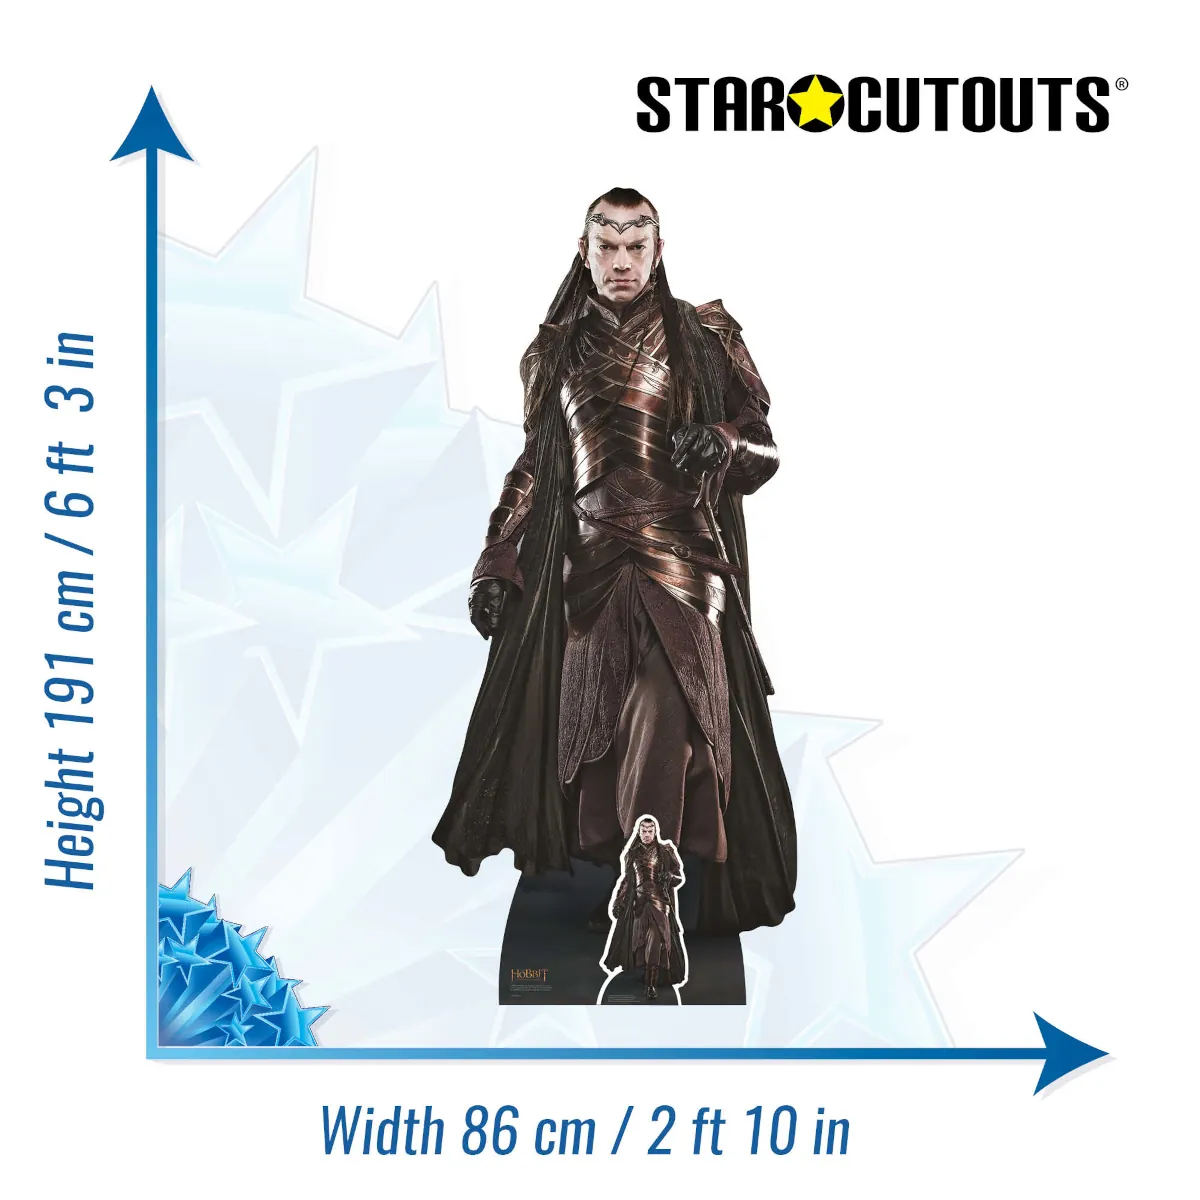 SC4136 Elrond (The Hobbit) Official Lifesize + Mini Cardboard Cutout Standee Size